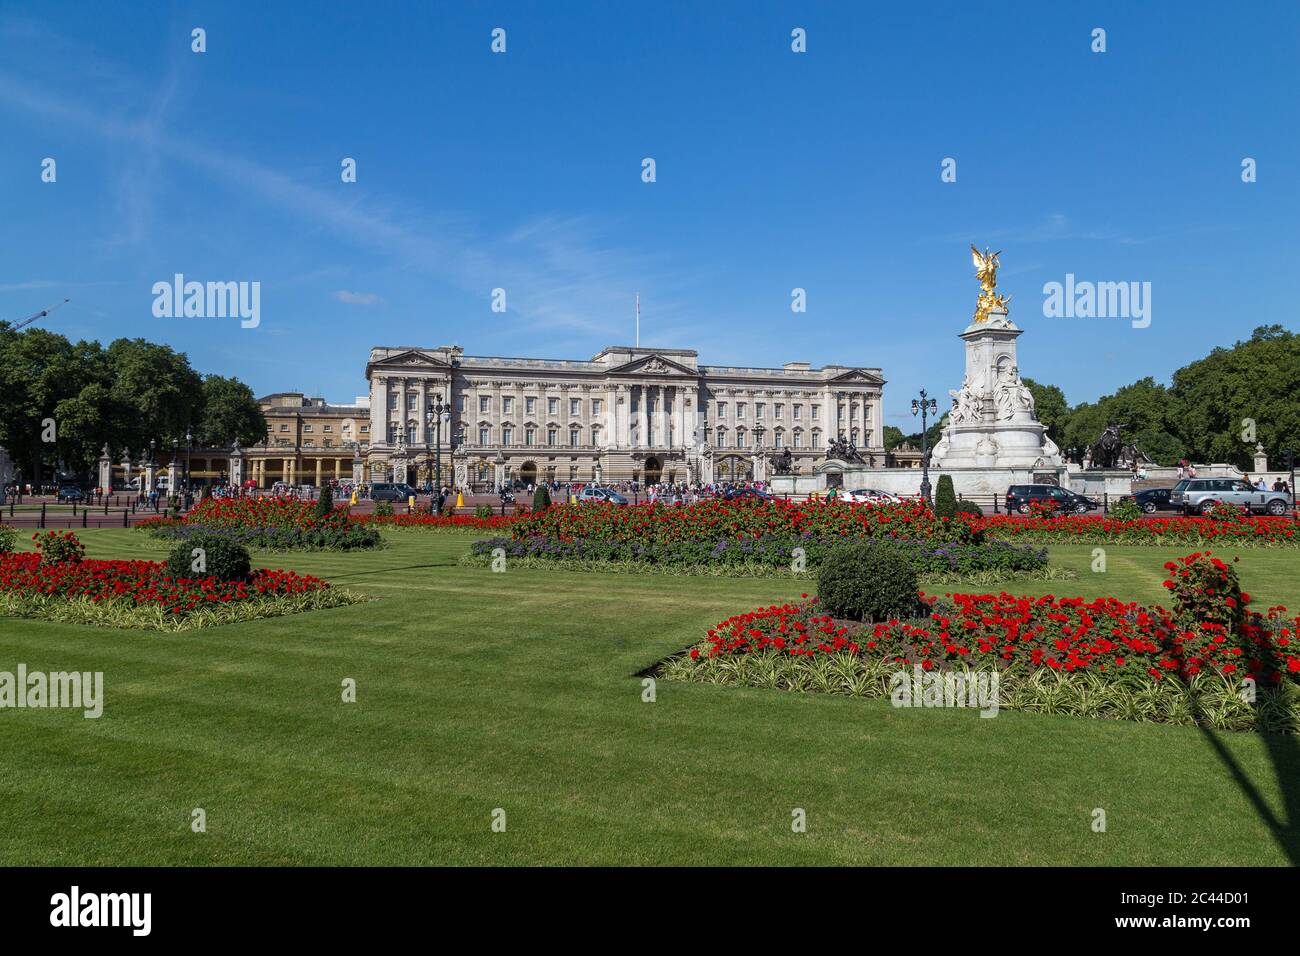 LONDON, UK - 18TH JULY 2015: Buckingham Palace in London during the summer showing the buildings and flowers. People can be seen outside. Stock Photo